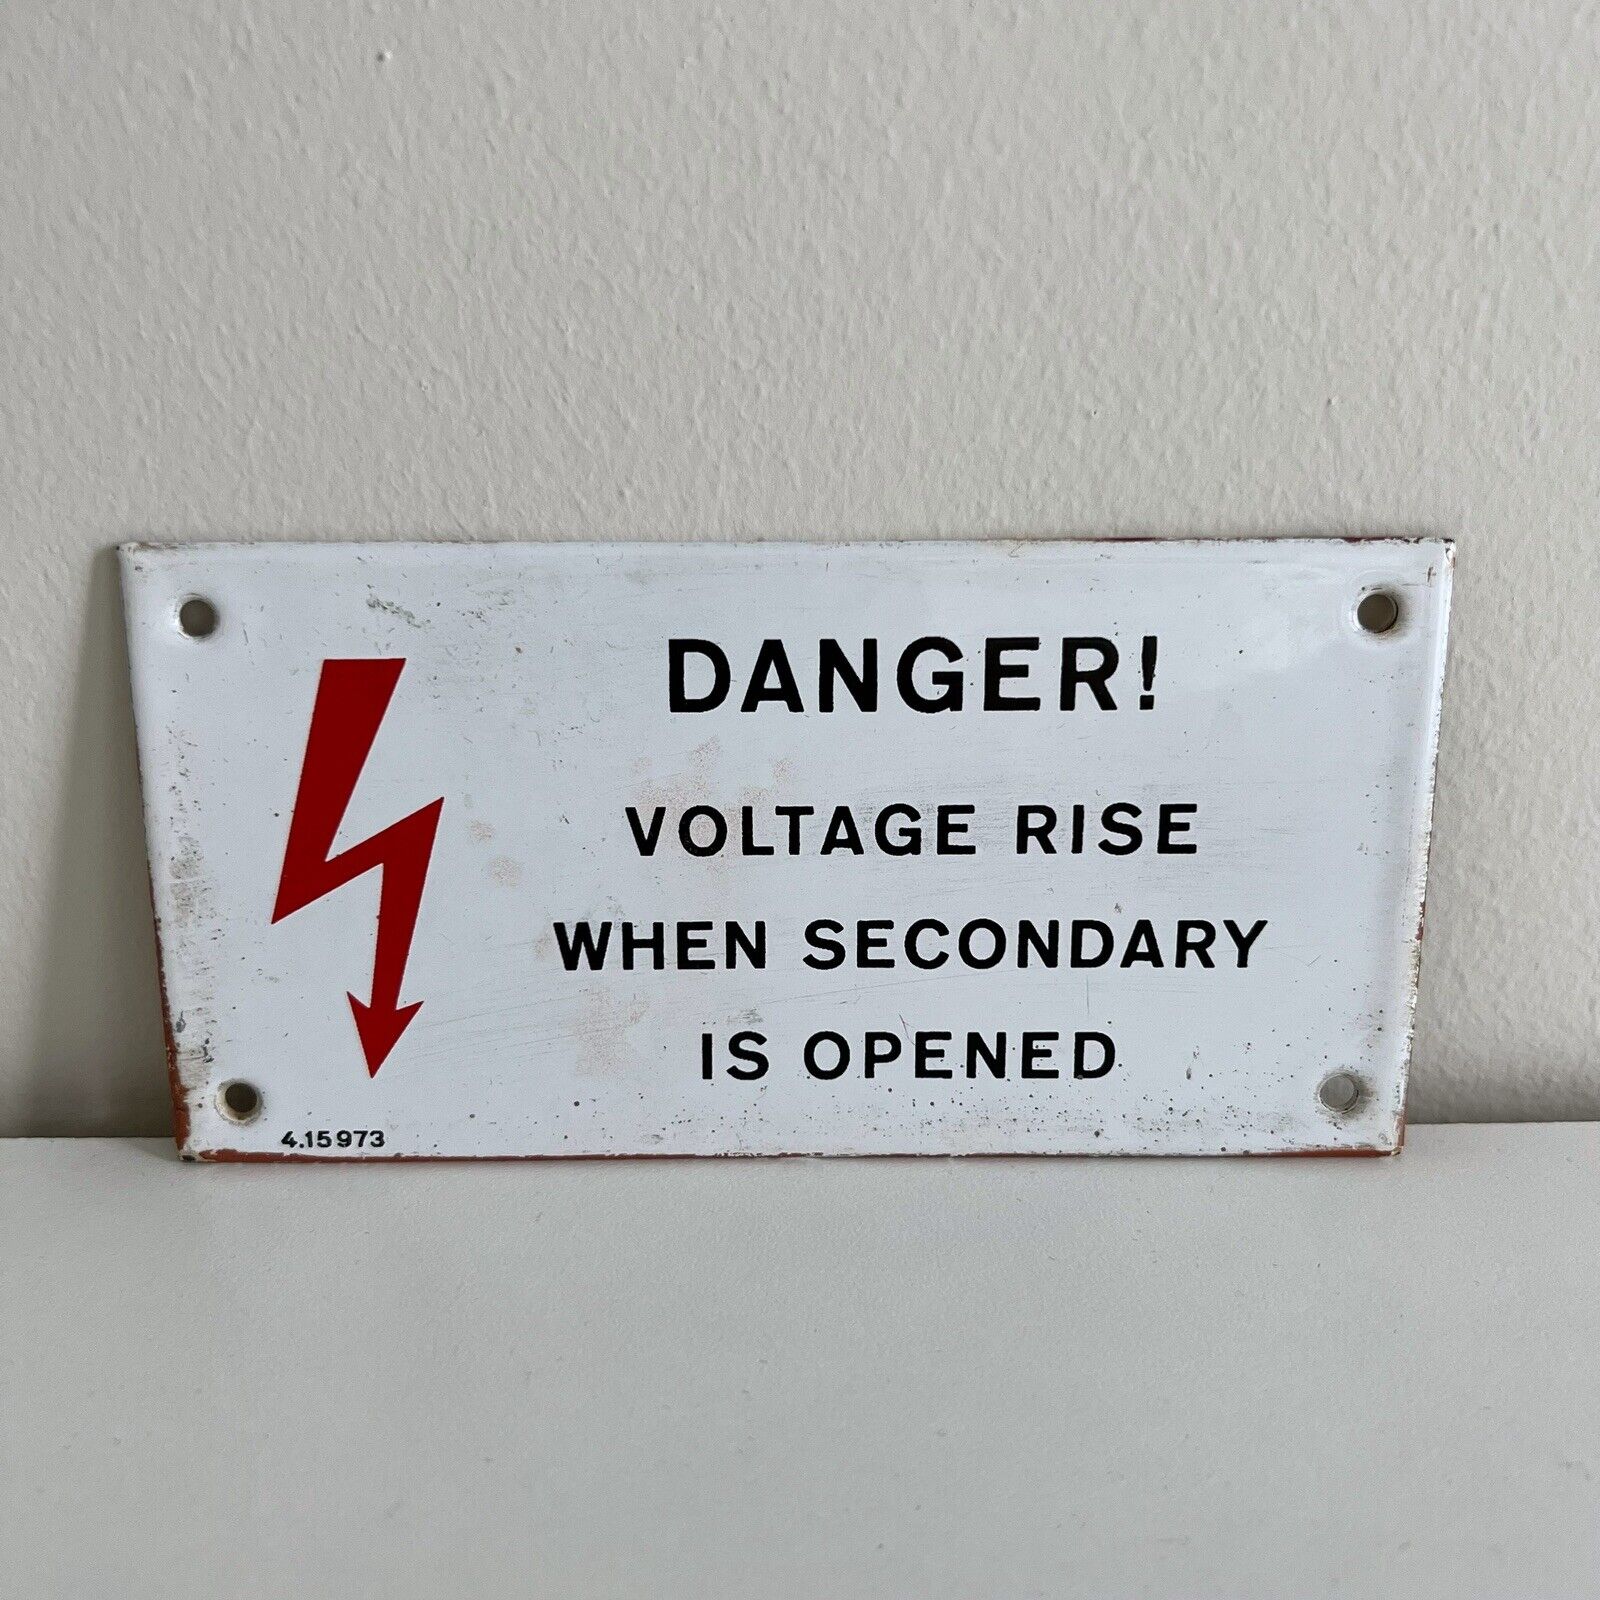 Vintage Small Subway Danger Voltage Sign Porcelain Metal White Secondary is Open